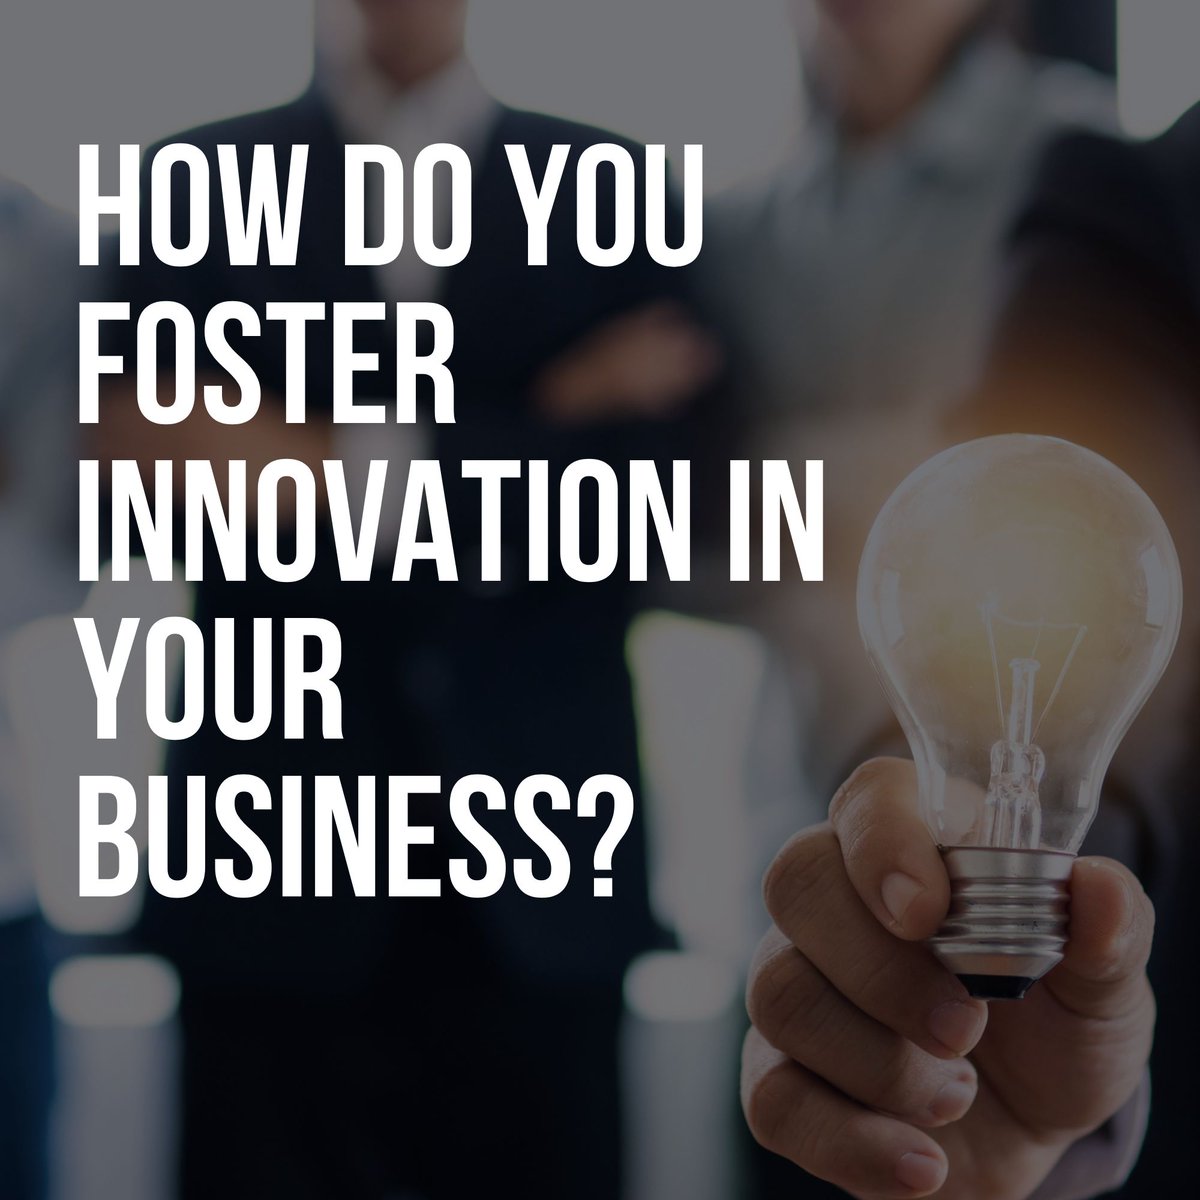 🤔 How do you foster innovation in your business? We'd love to hear how you drive innovation and stay ahead of the game. Share your strategies and insights below! #InnovationInspiration #FosterCreativity #BusinessInnovations #ShareYourInsights